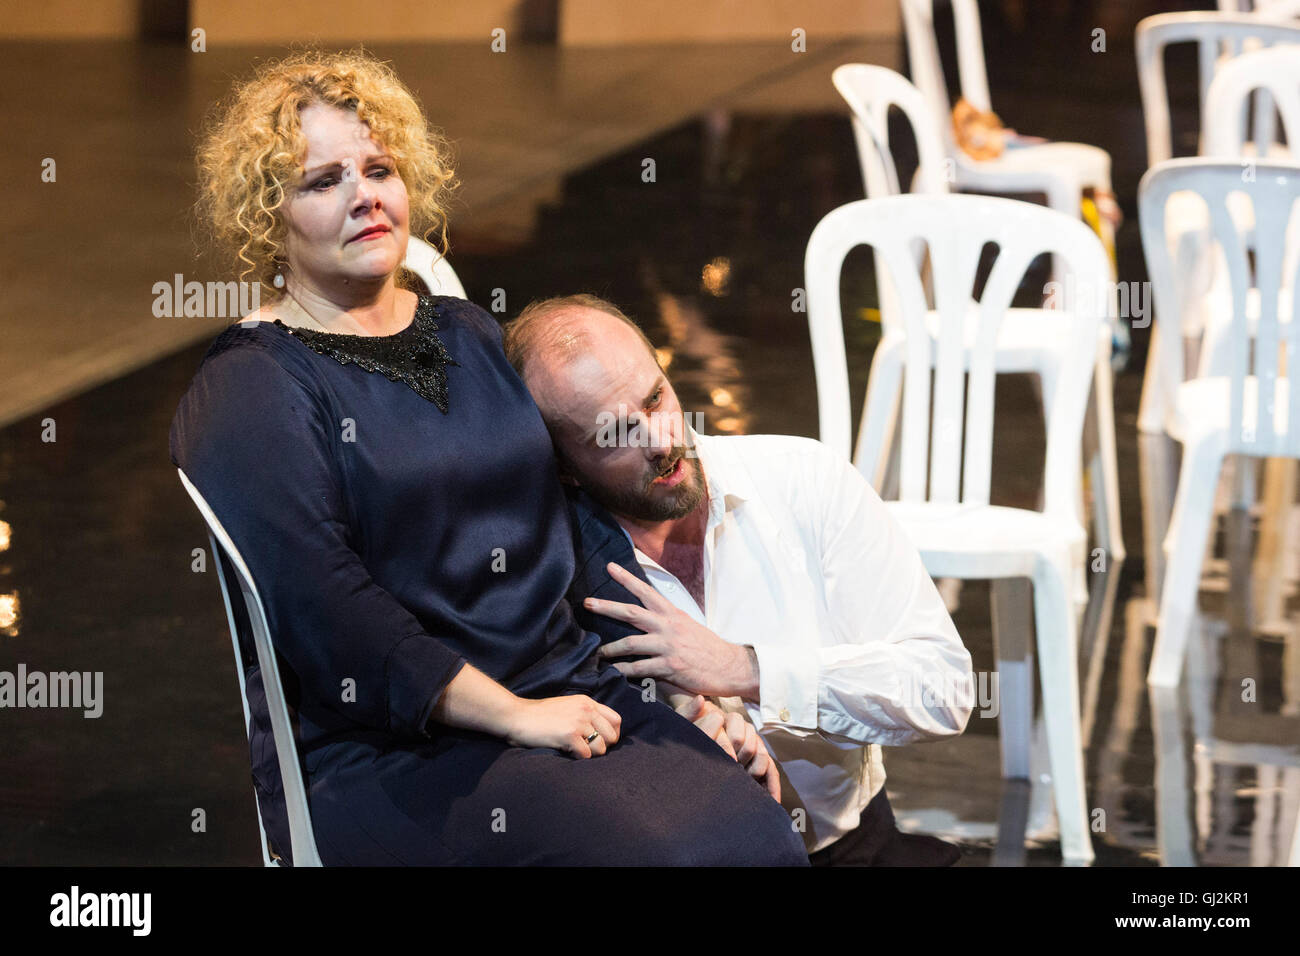 Birgitte Christensen with Thomas Walker. The opera Alceste by Gluck opens the 2016 Ruhrtriennale festival. The opera is directed by Johan Simons. With Birgitte Christensen as Alceste, Thomas Walker as Admeto, Georg Nigl (various roles), Kristina Hammarström as Ismene, Anicio Zorzi Giustiniani as Evandro, Alicia Amo as Aspasi, Konstantin Bader as Eumelo and the MusicAeterna Chorus of the Perm State Opera and Ballet Theatre. Music performed by B’Rock Orchestra, musical direction by René Jacobs. Stock Photo